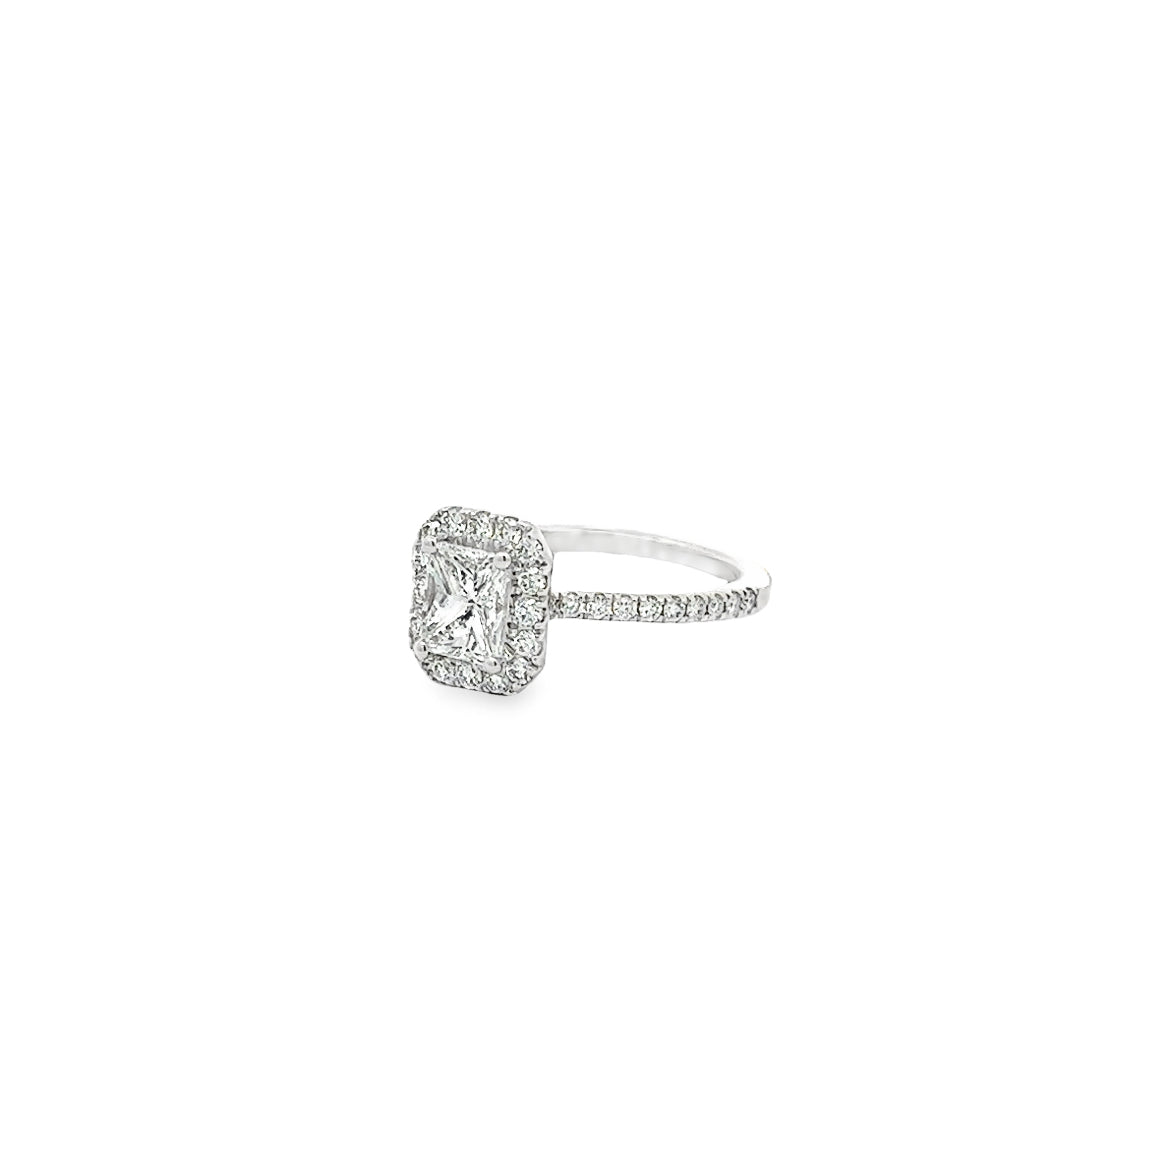 The Terry 18K White Gold Radiant Halo Engagement Ring